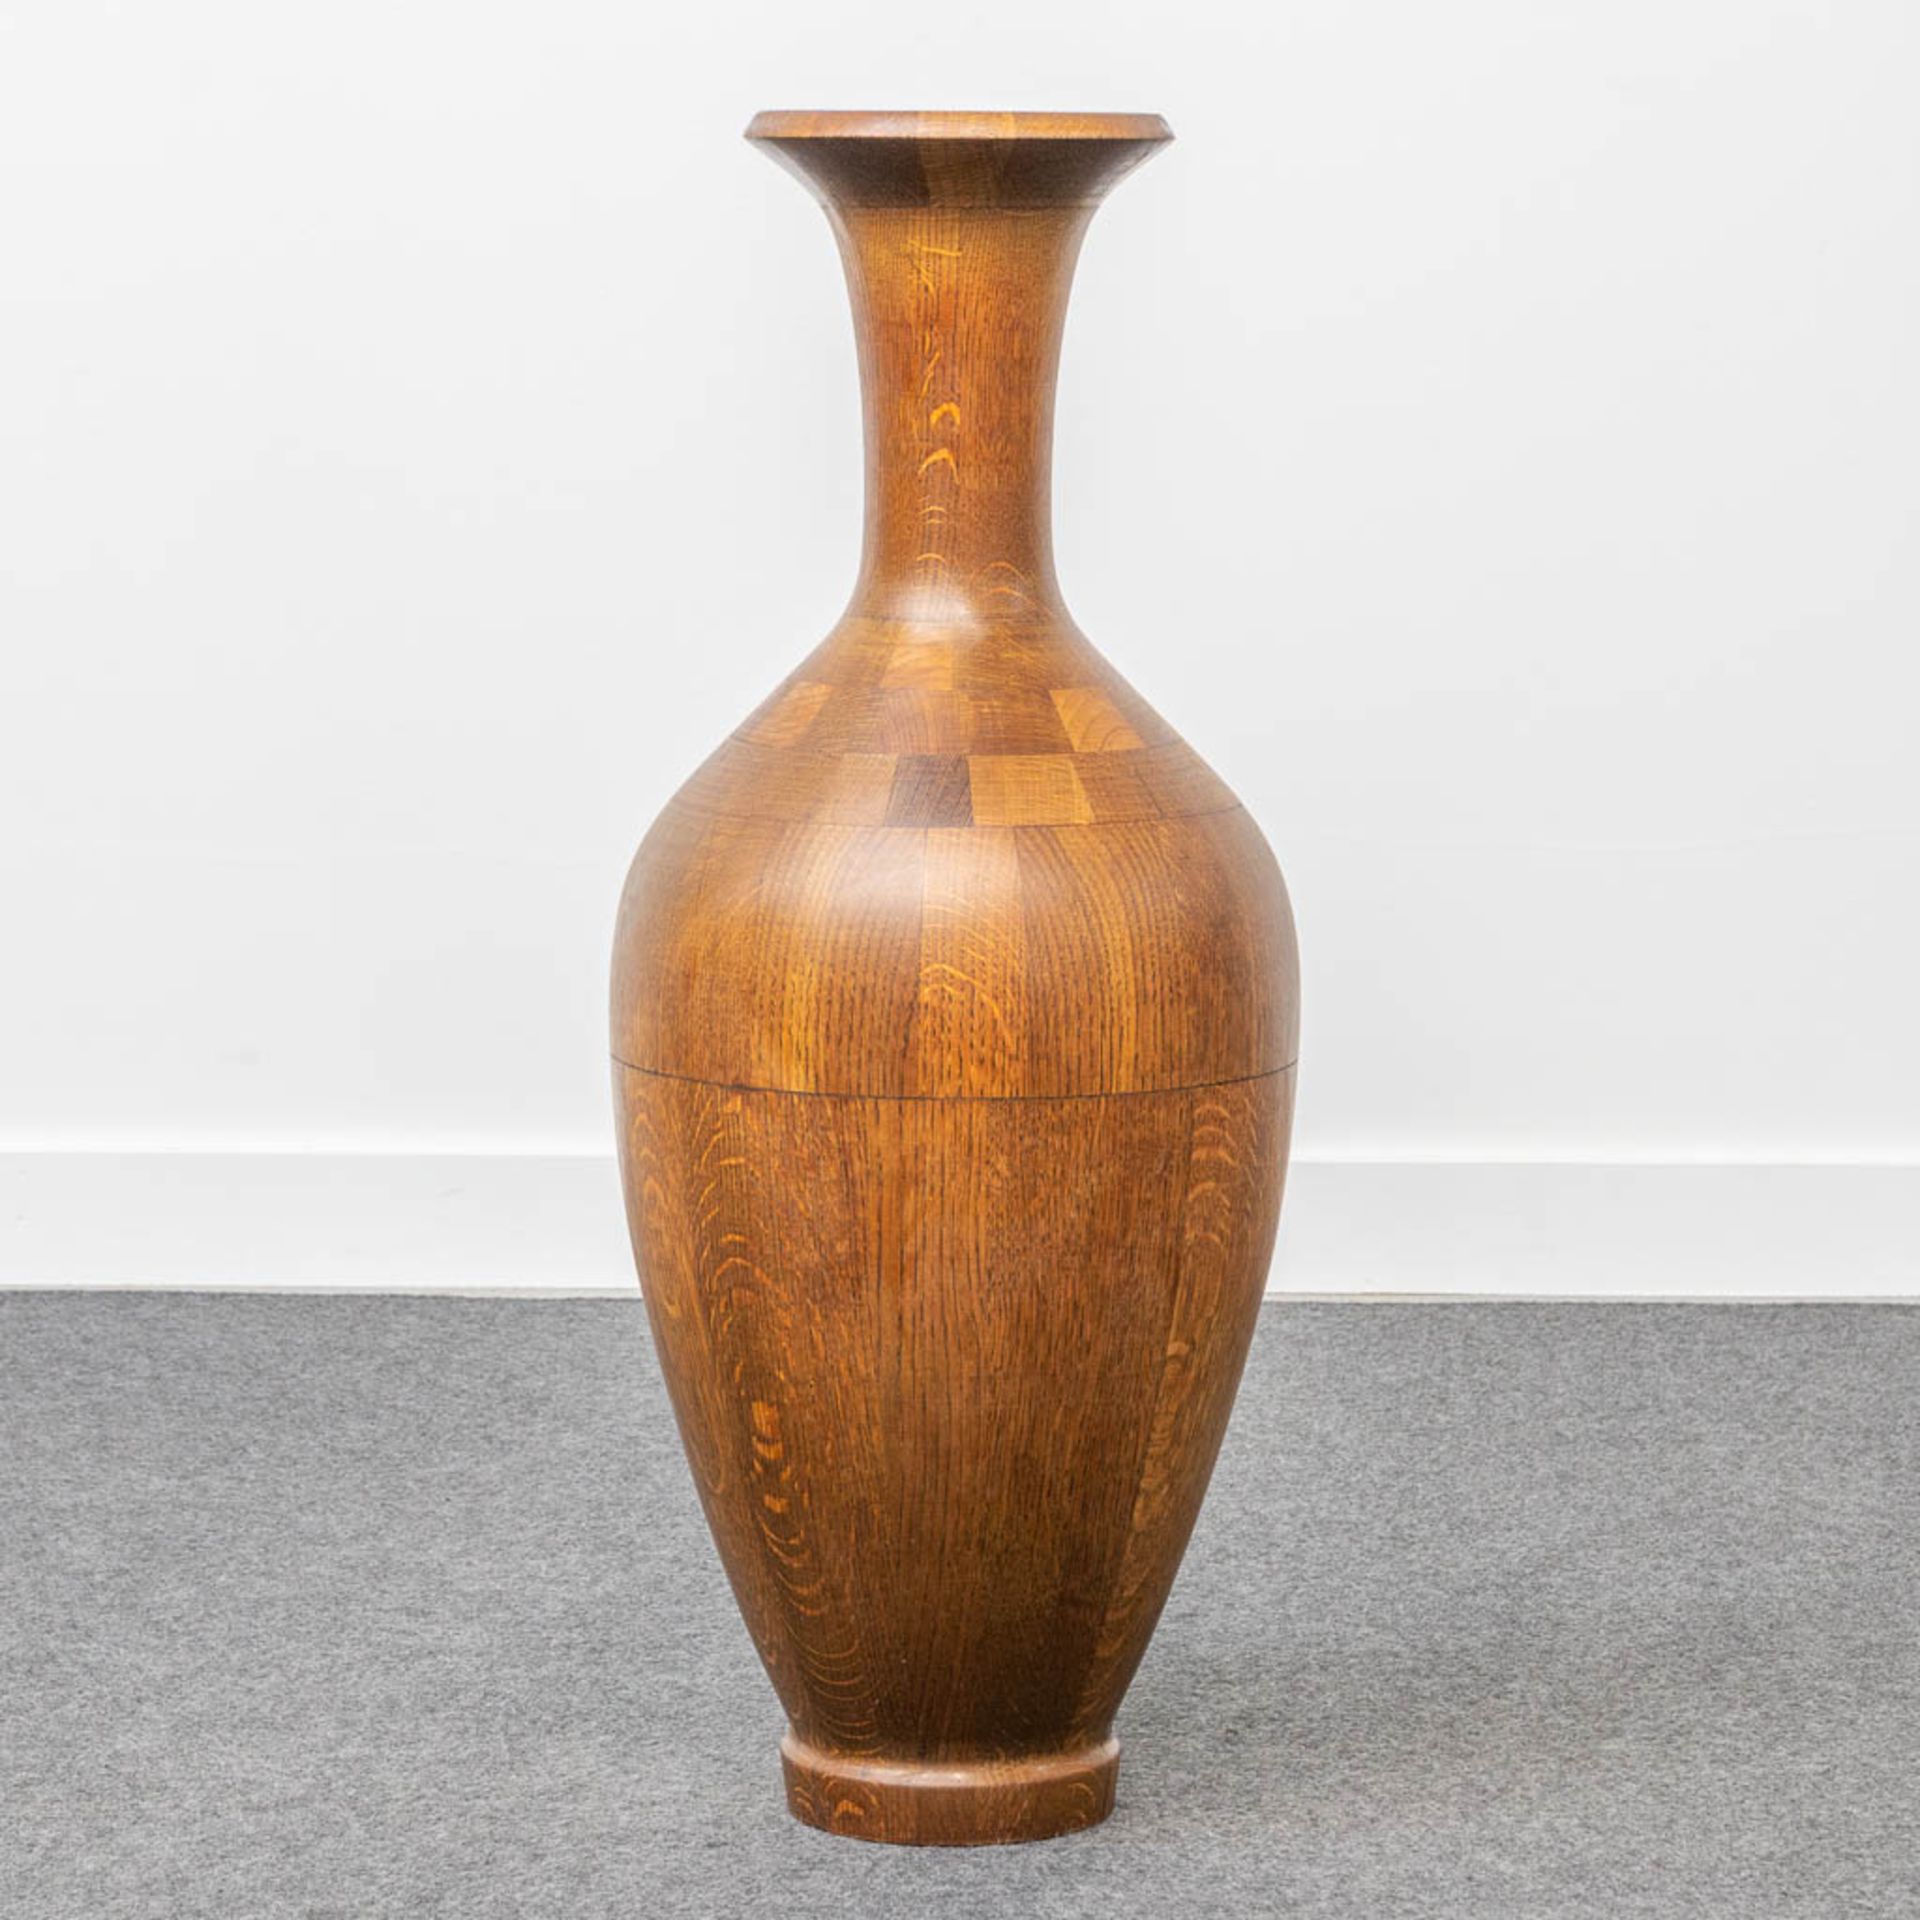 A collection of 4 wood-turned vases with inlay, made by DeCoene in Kortijk, Belgium. - Image 6 of 11